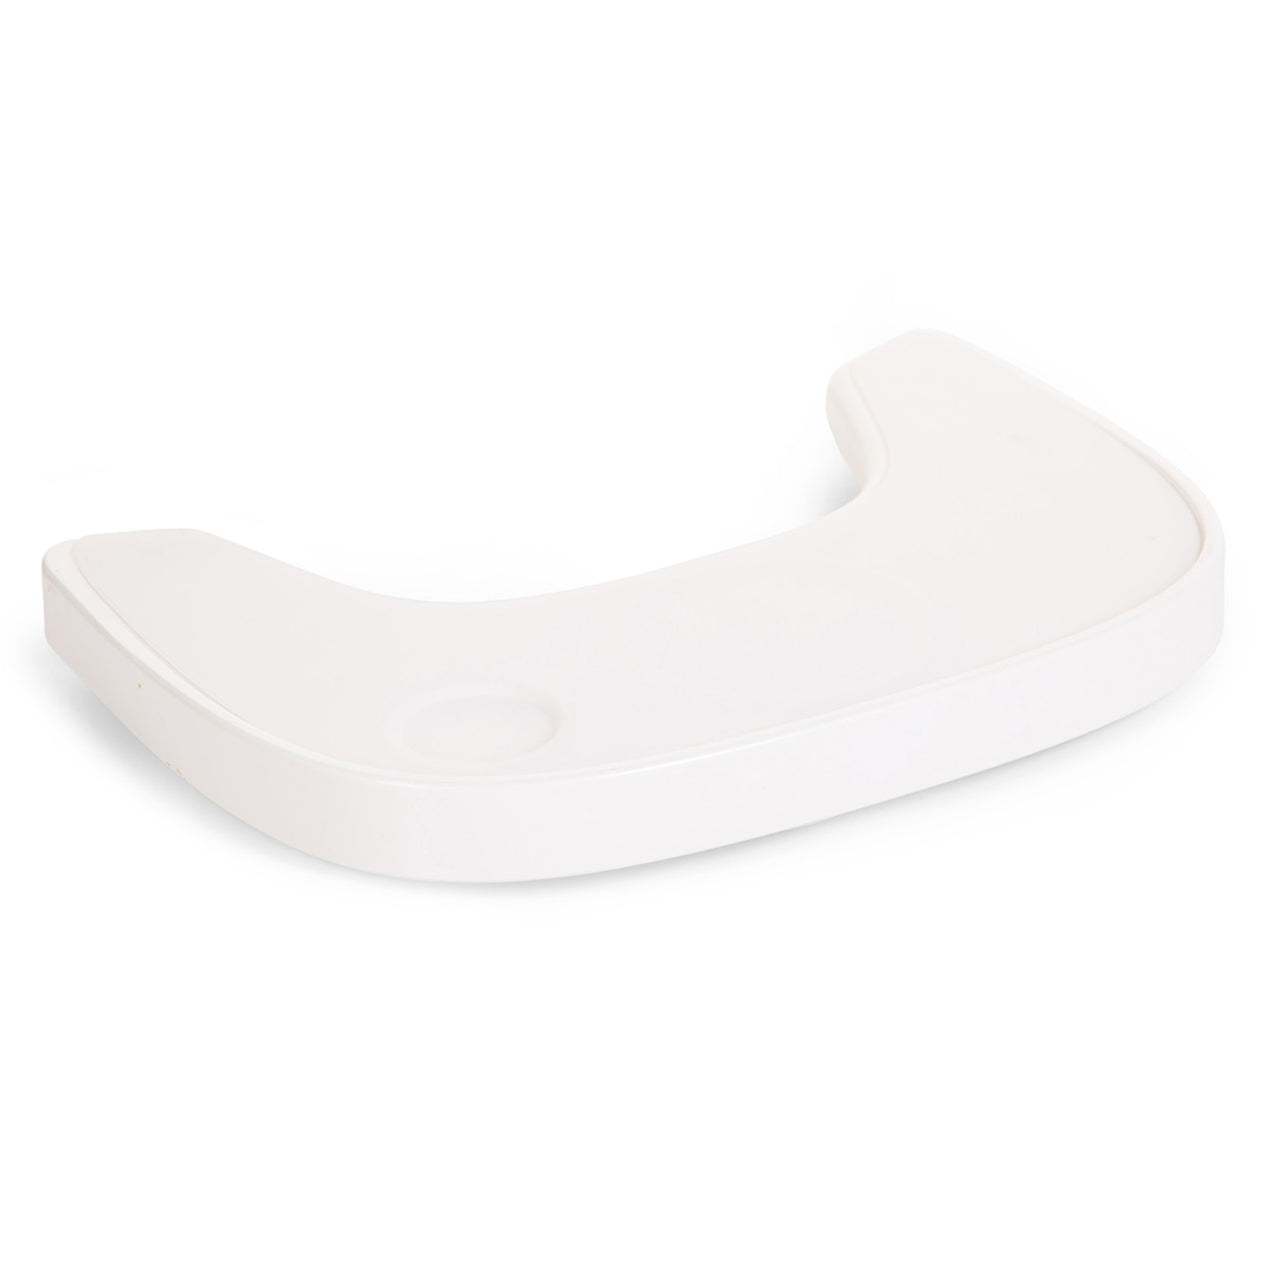 Evolu Tray Abs White + Silicone Placemat